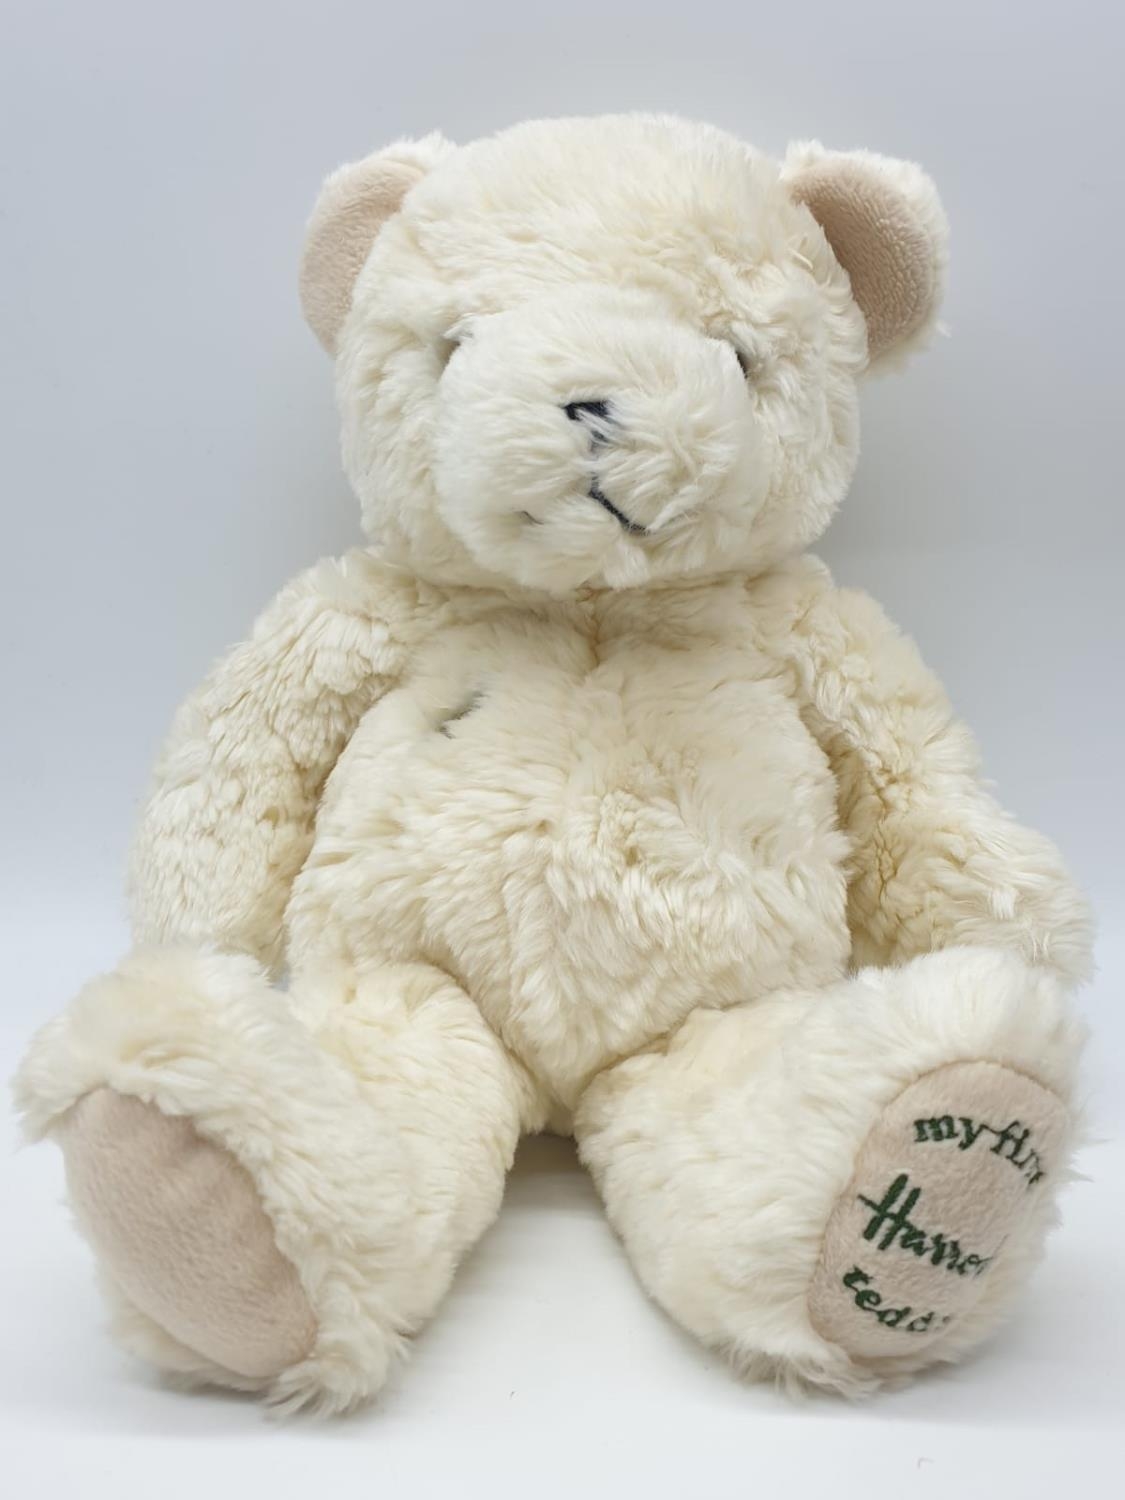 Two Harrods teddy bears, one being "My first Harrods teddy" and a traditional Harrods teddy. Approx. - Image 6 of 10